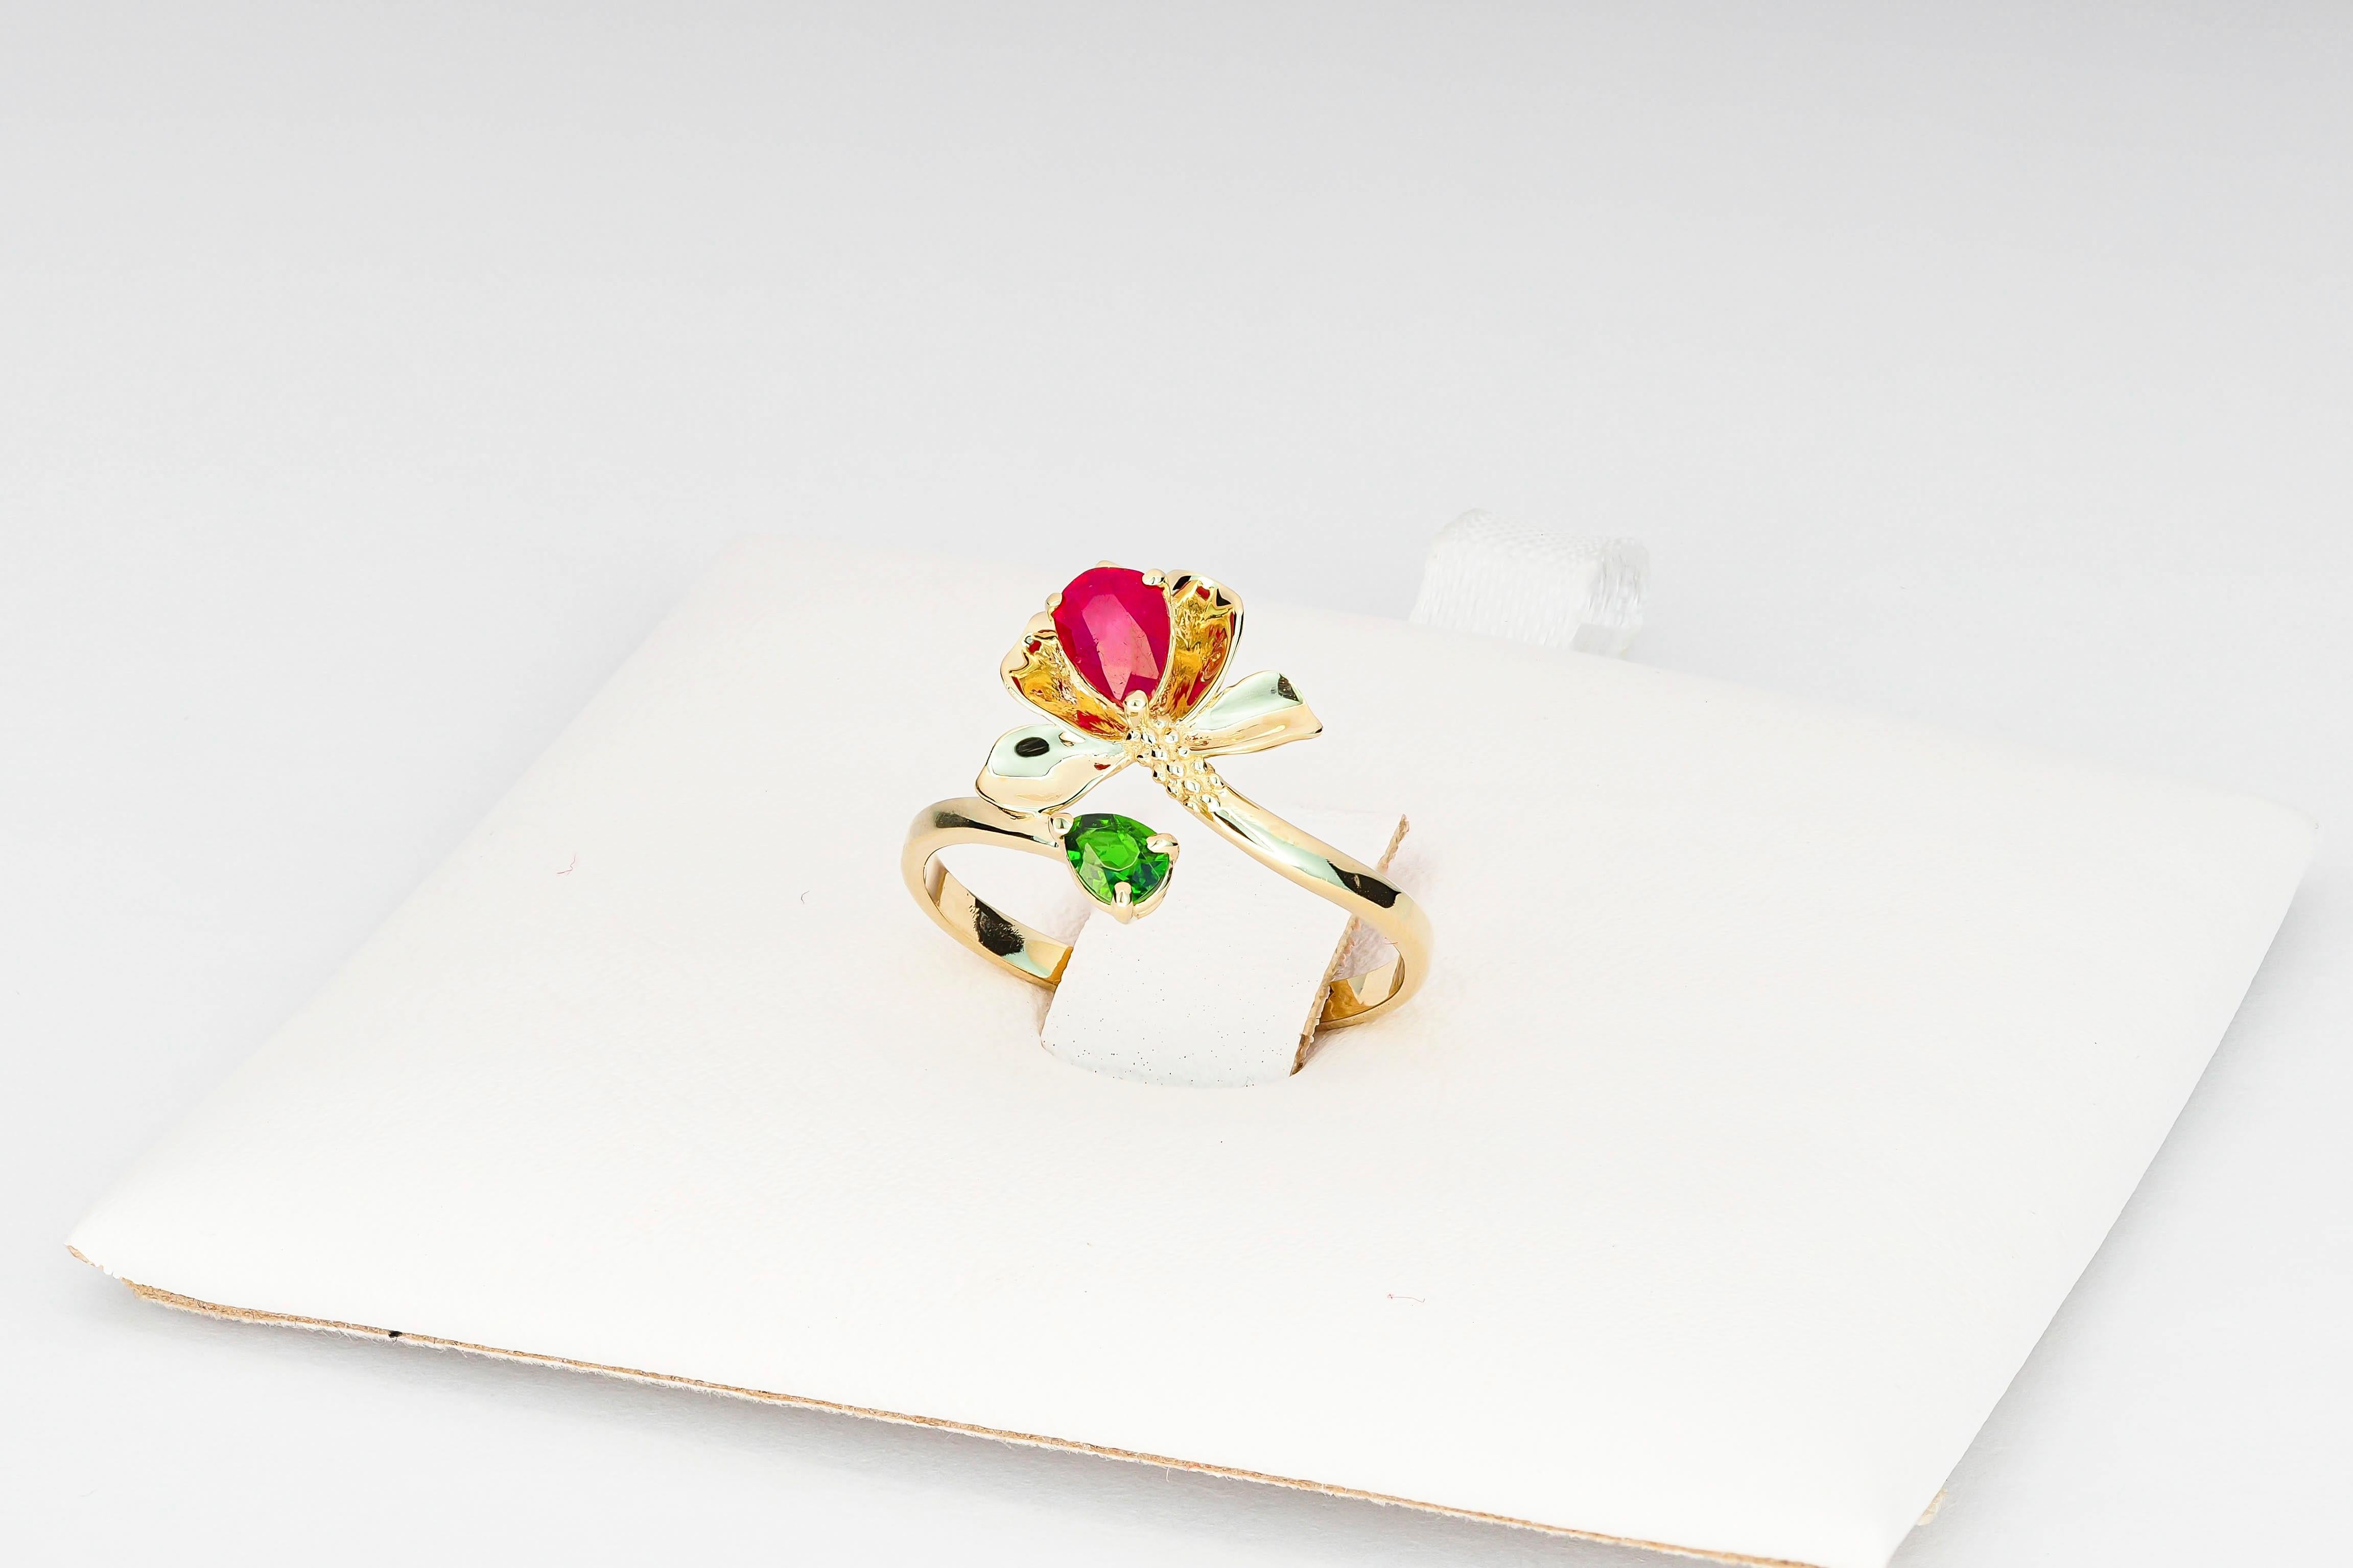 For Sale:  14 K Gold Ring with Ruby and Chrome Diopside. Water Lily Flower Gold Ring! 3